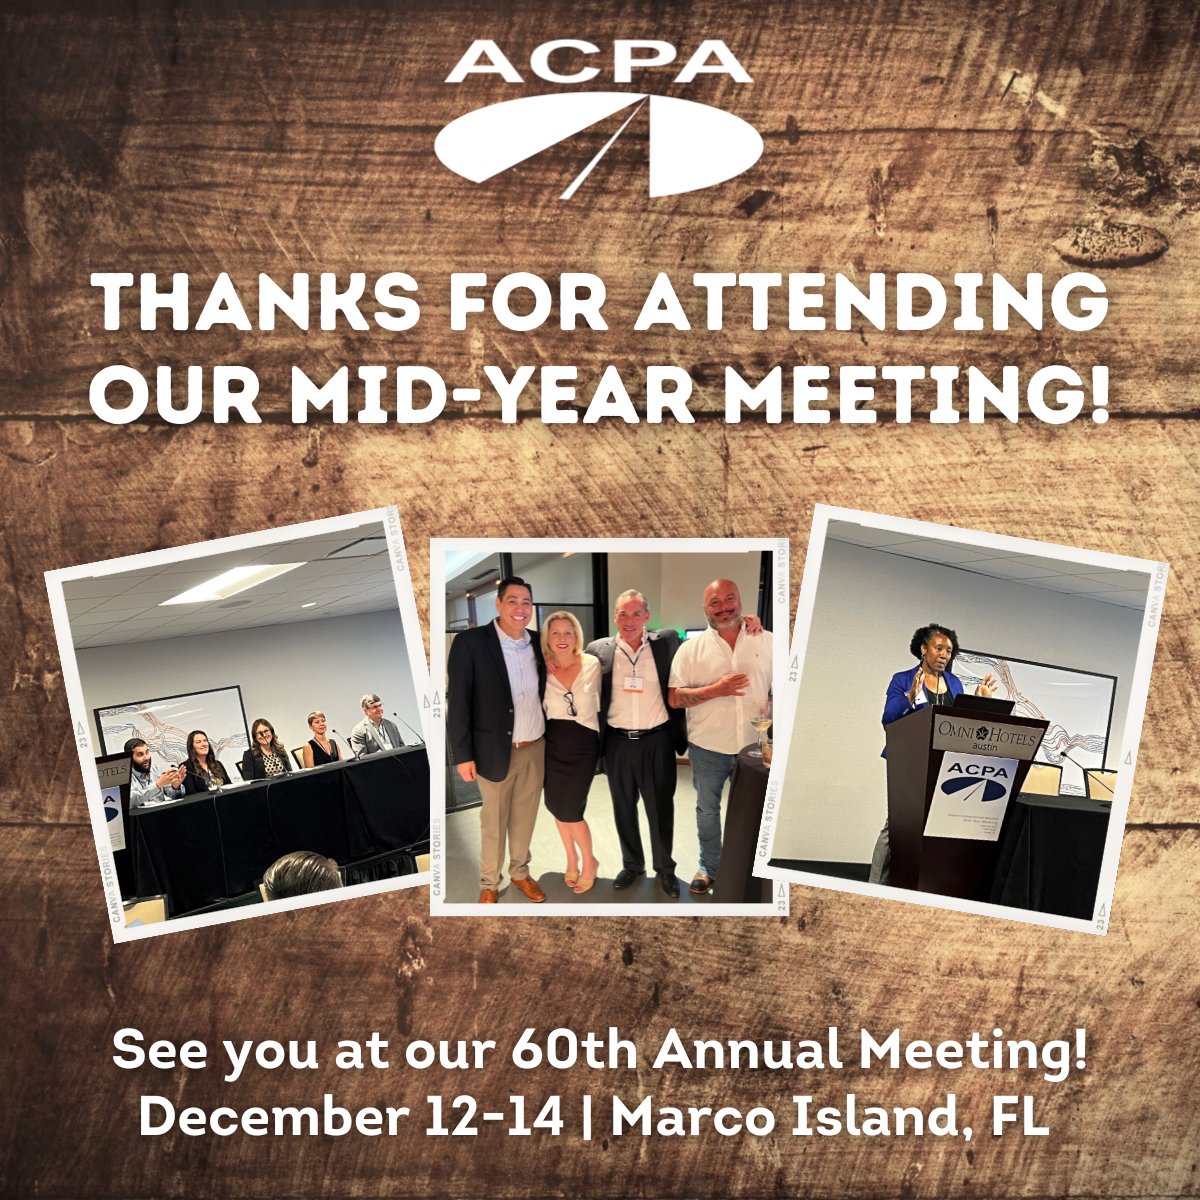 Thank you to all who attended our Mid-Year Meeting this week in Austin, TX! It was our biggest Mid-Year yet, with record attendance. The meeting featured technical workshops and discussions, guest speakers from TXDOT and FHWA, and two fun receptions.